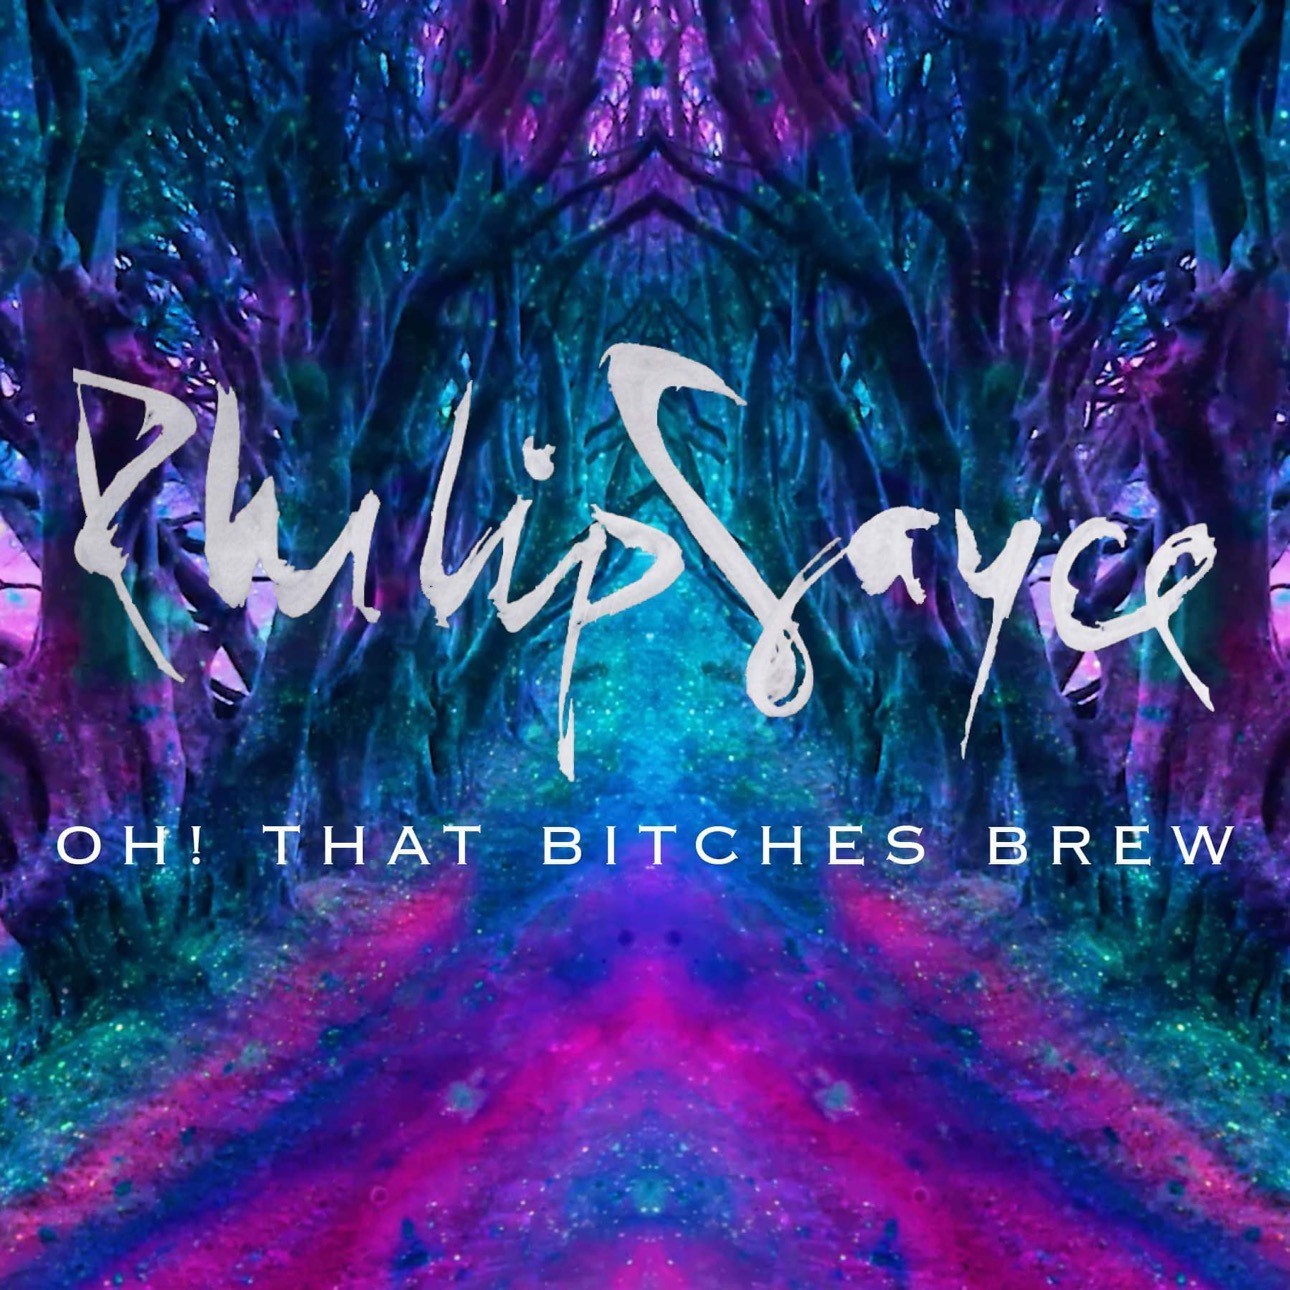 Philip Sayce - Oh! That Bitches Brew